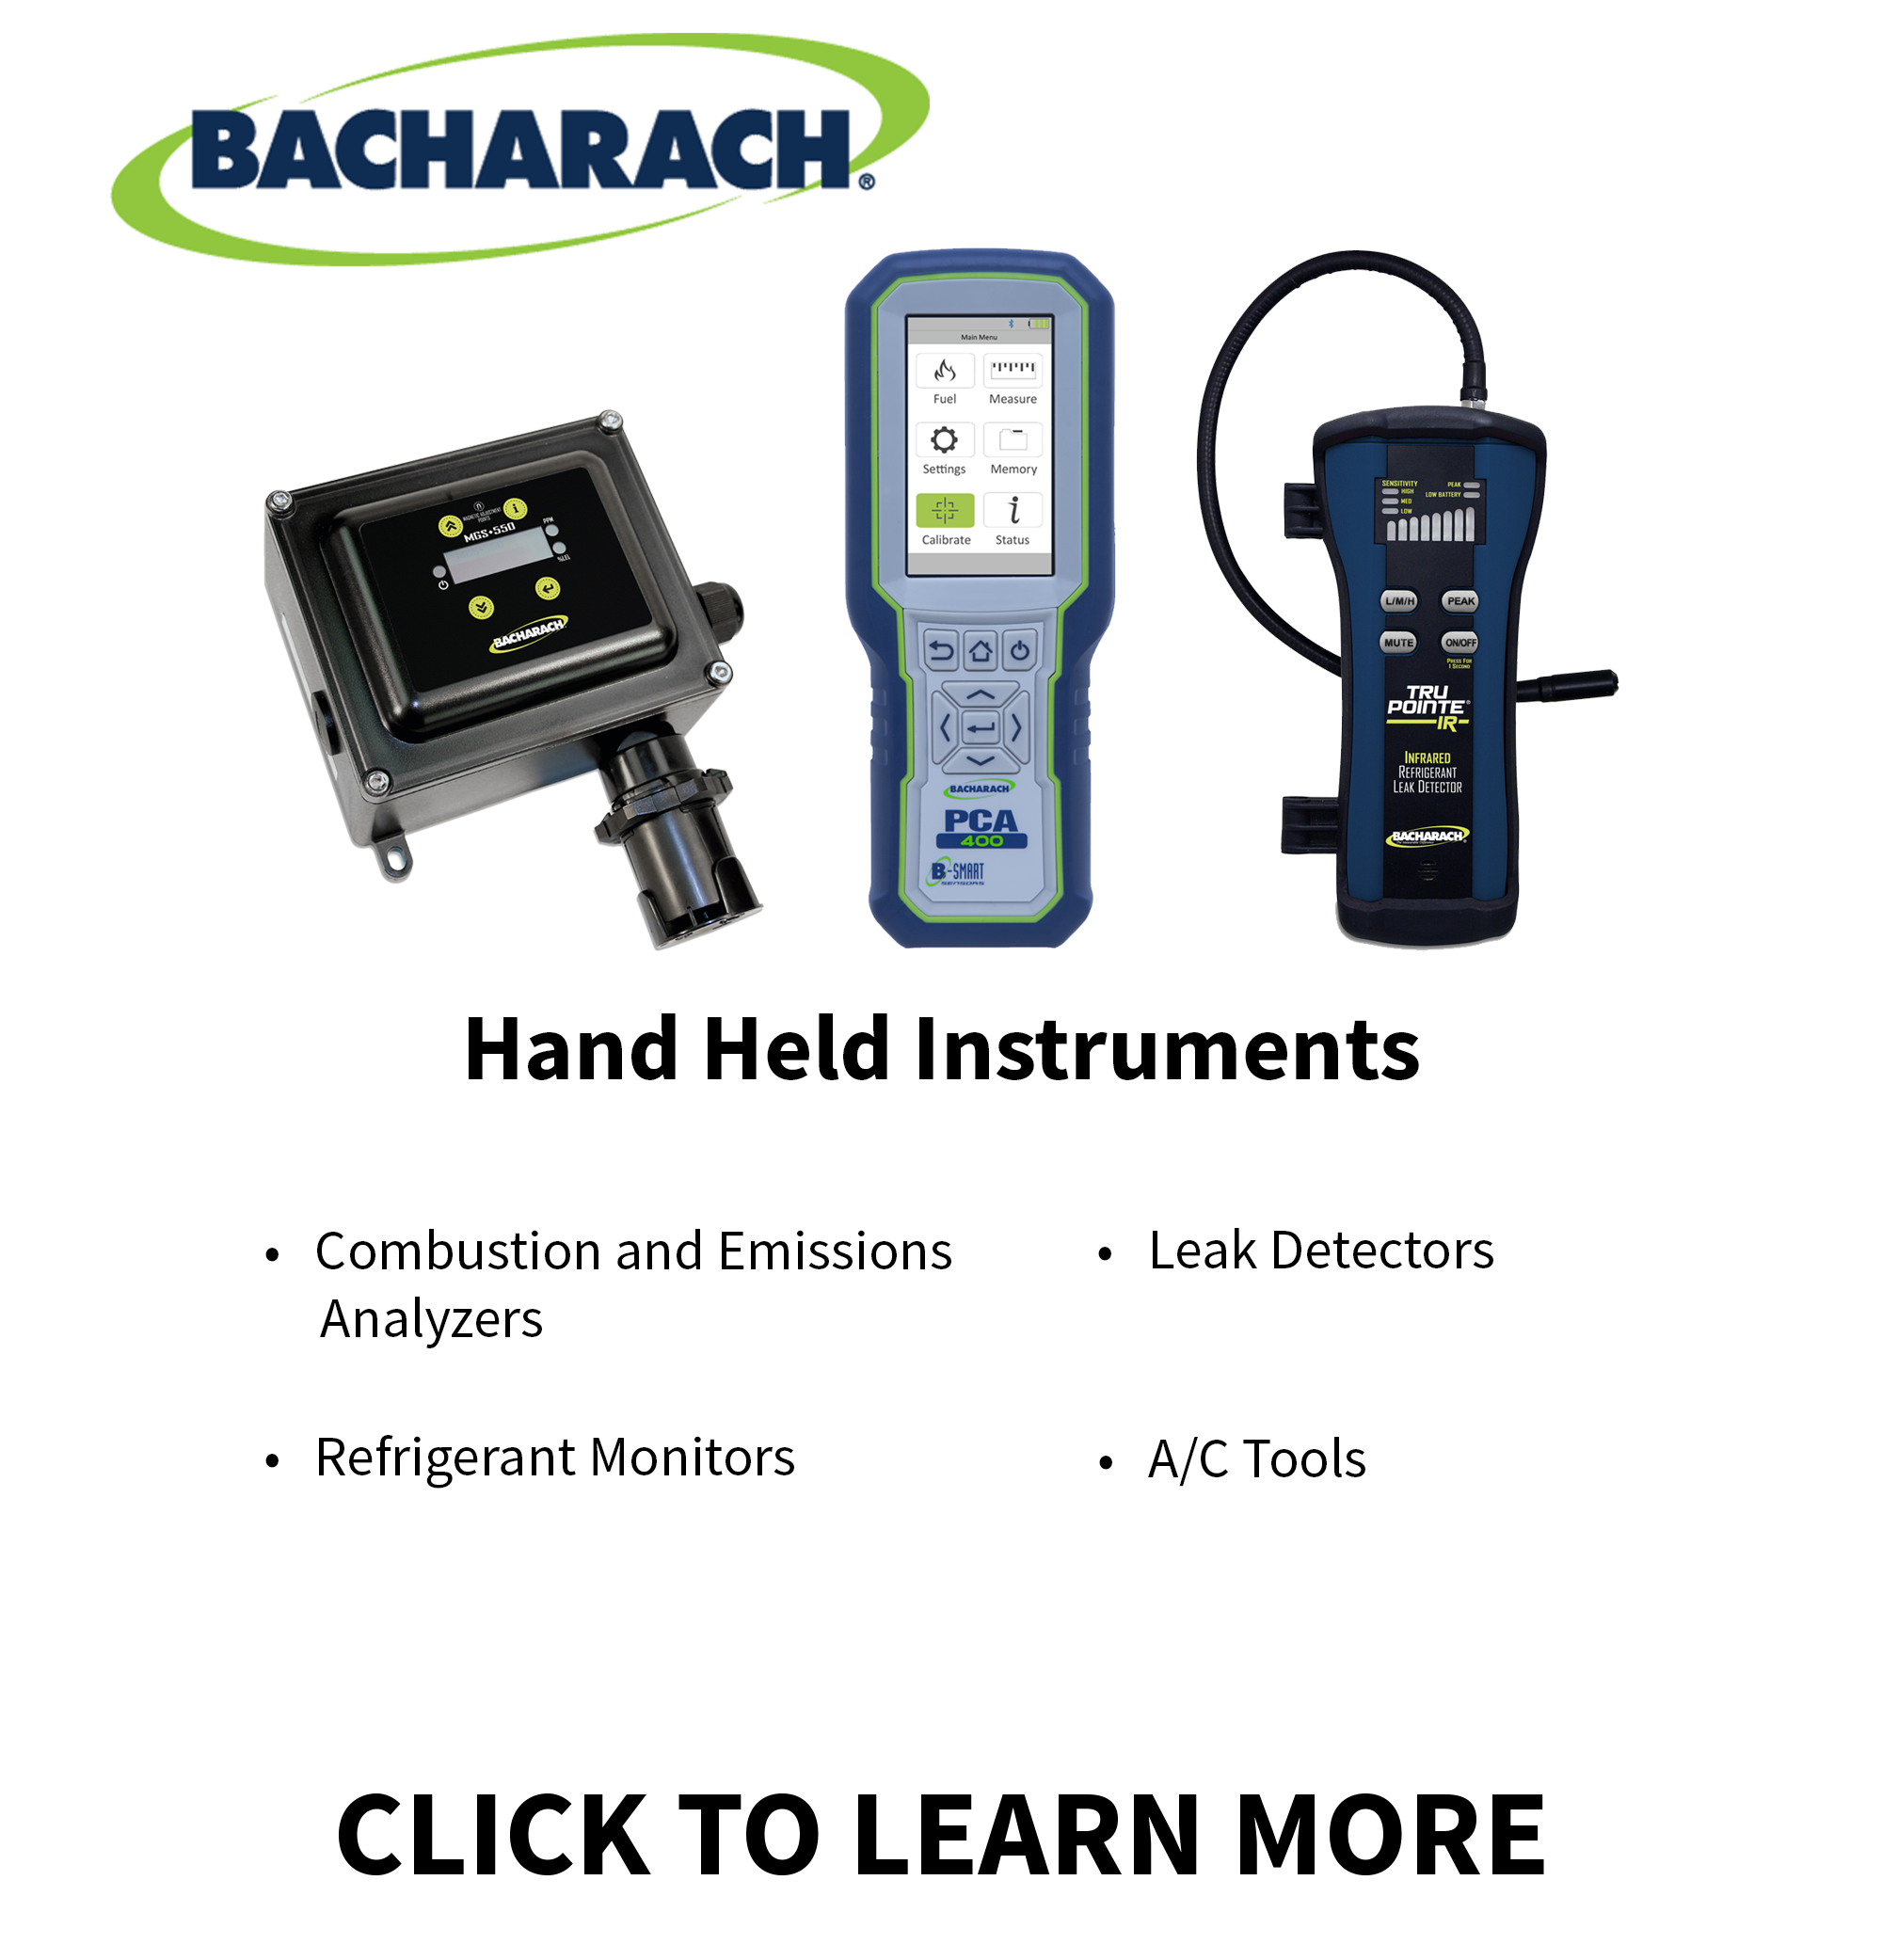 Ohio Valley Industrial Services- Bacharach Hand Held Instruments